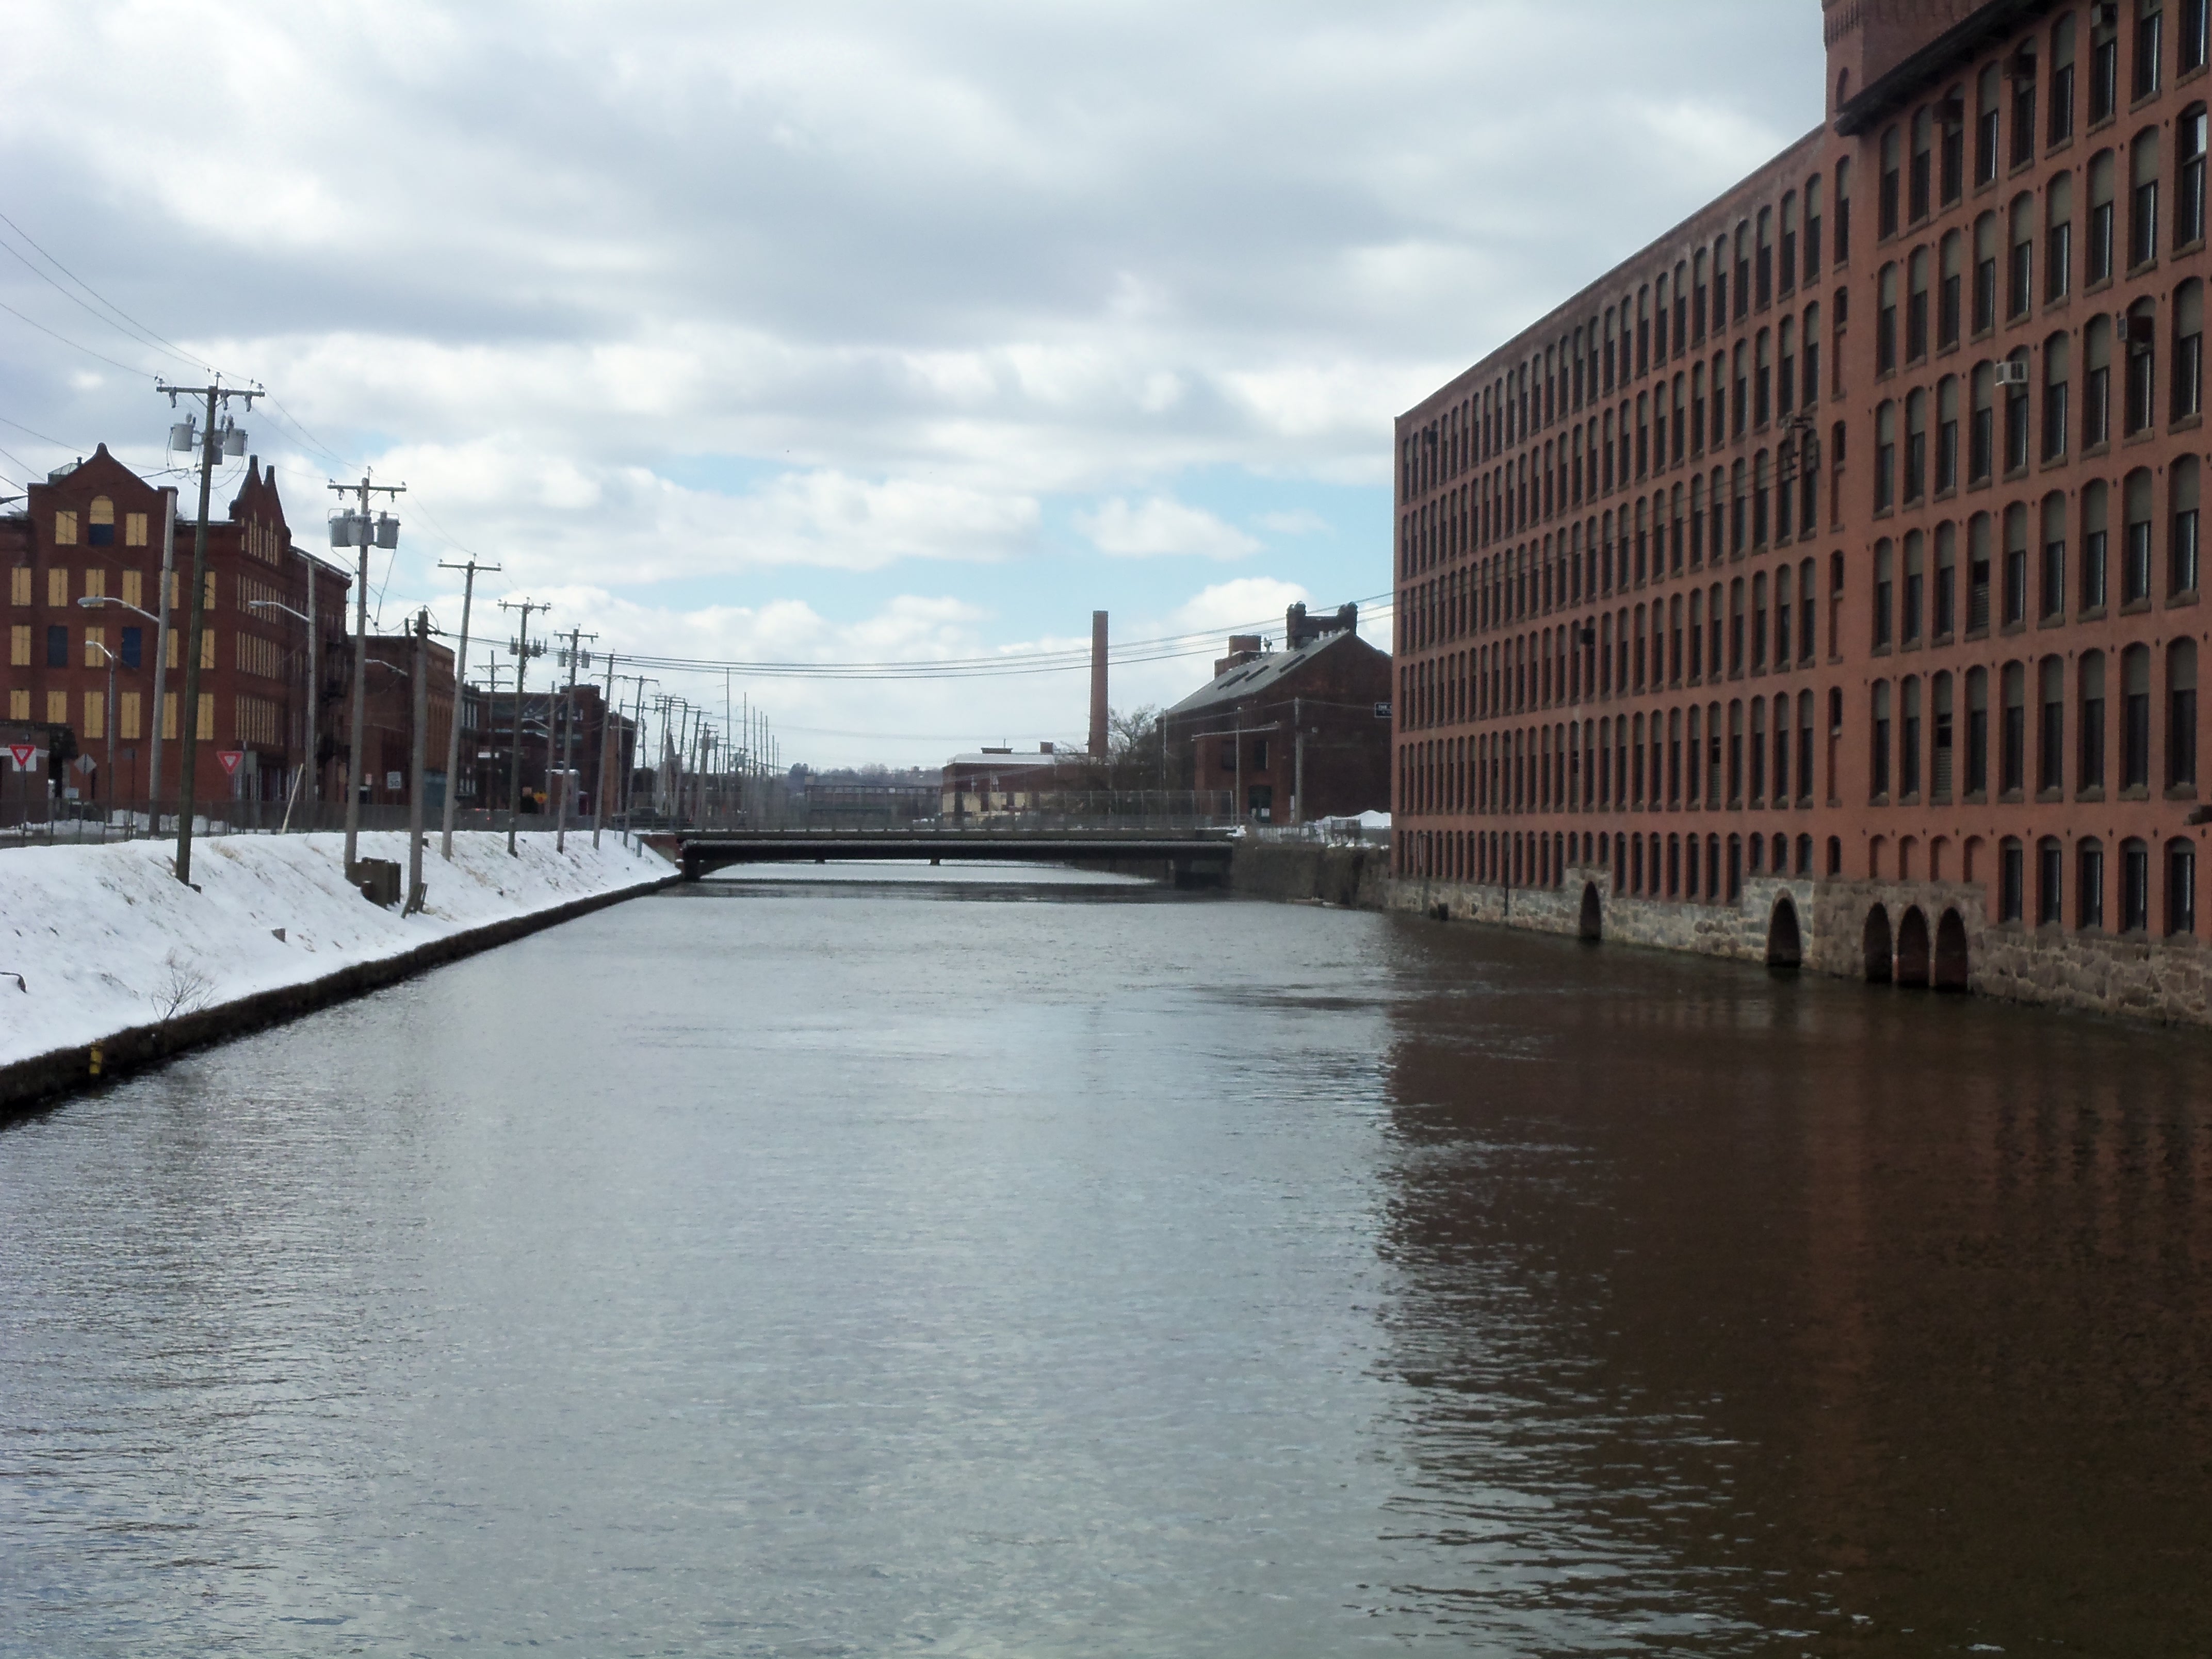 Holyoke mill and canal